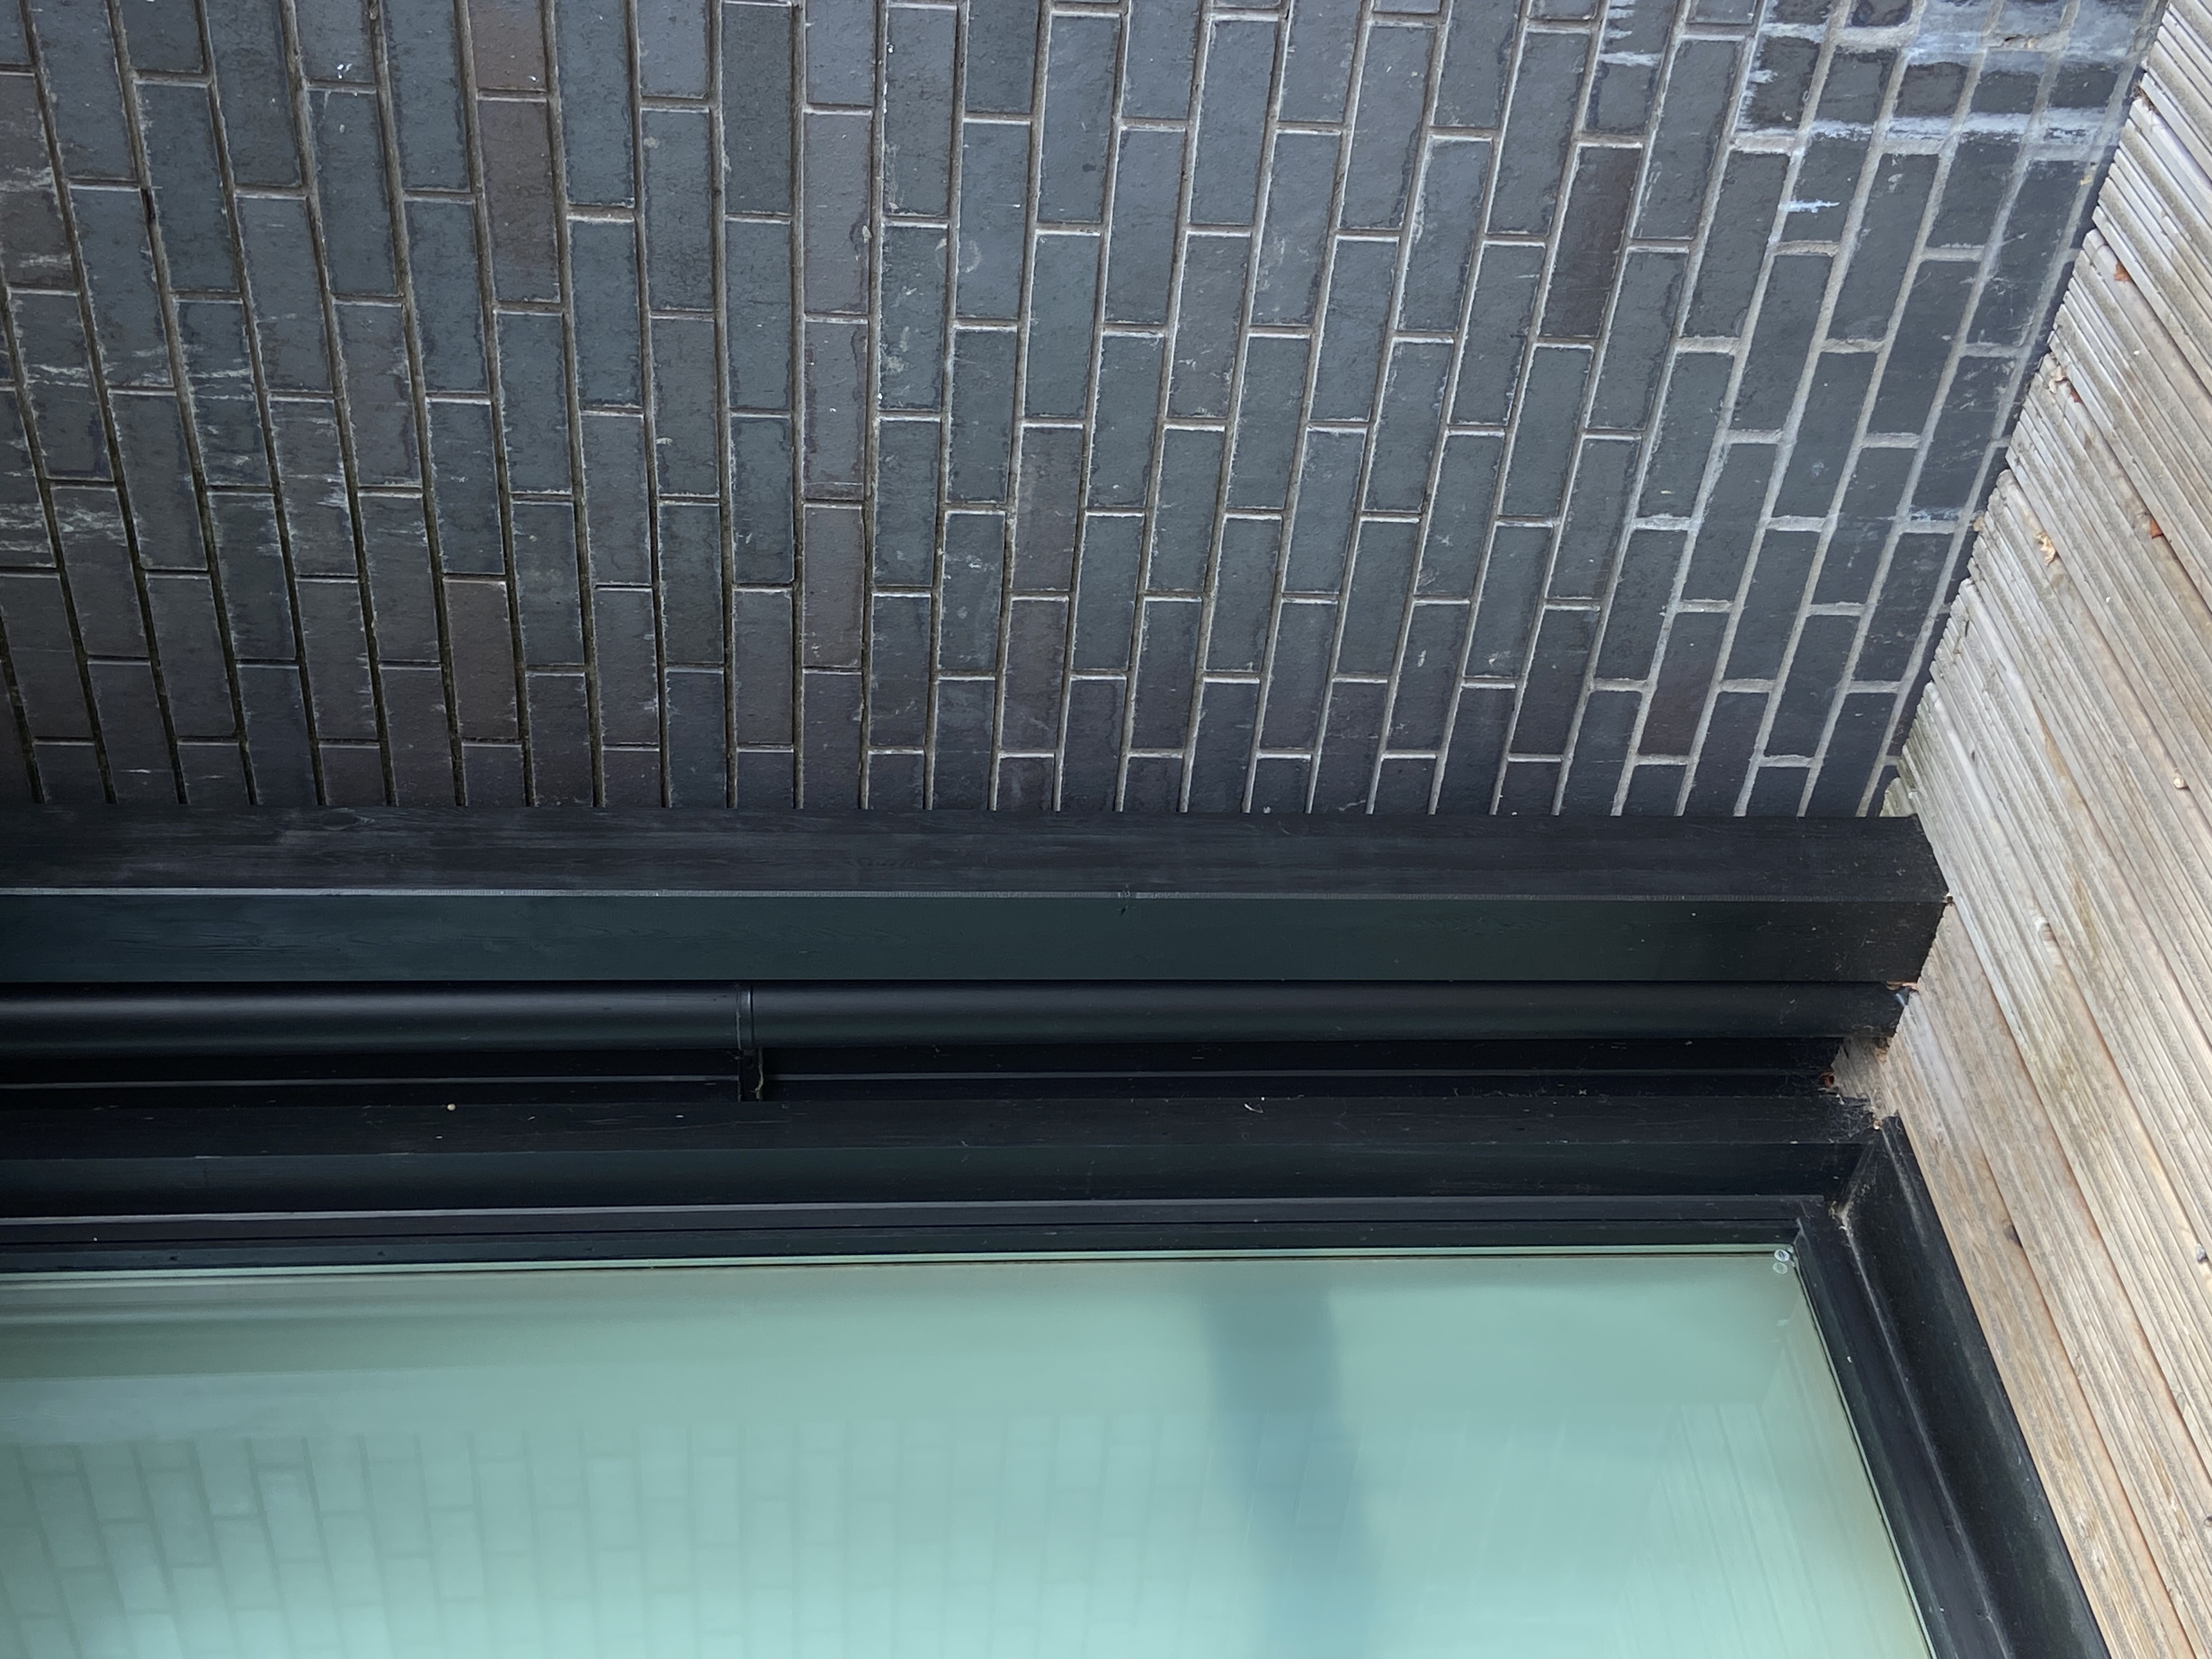 indoor/outdoor energy, glass pane to the left, black brick to the right. the floor is wooden